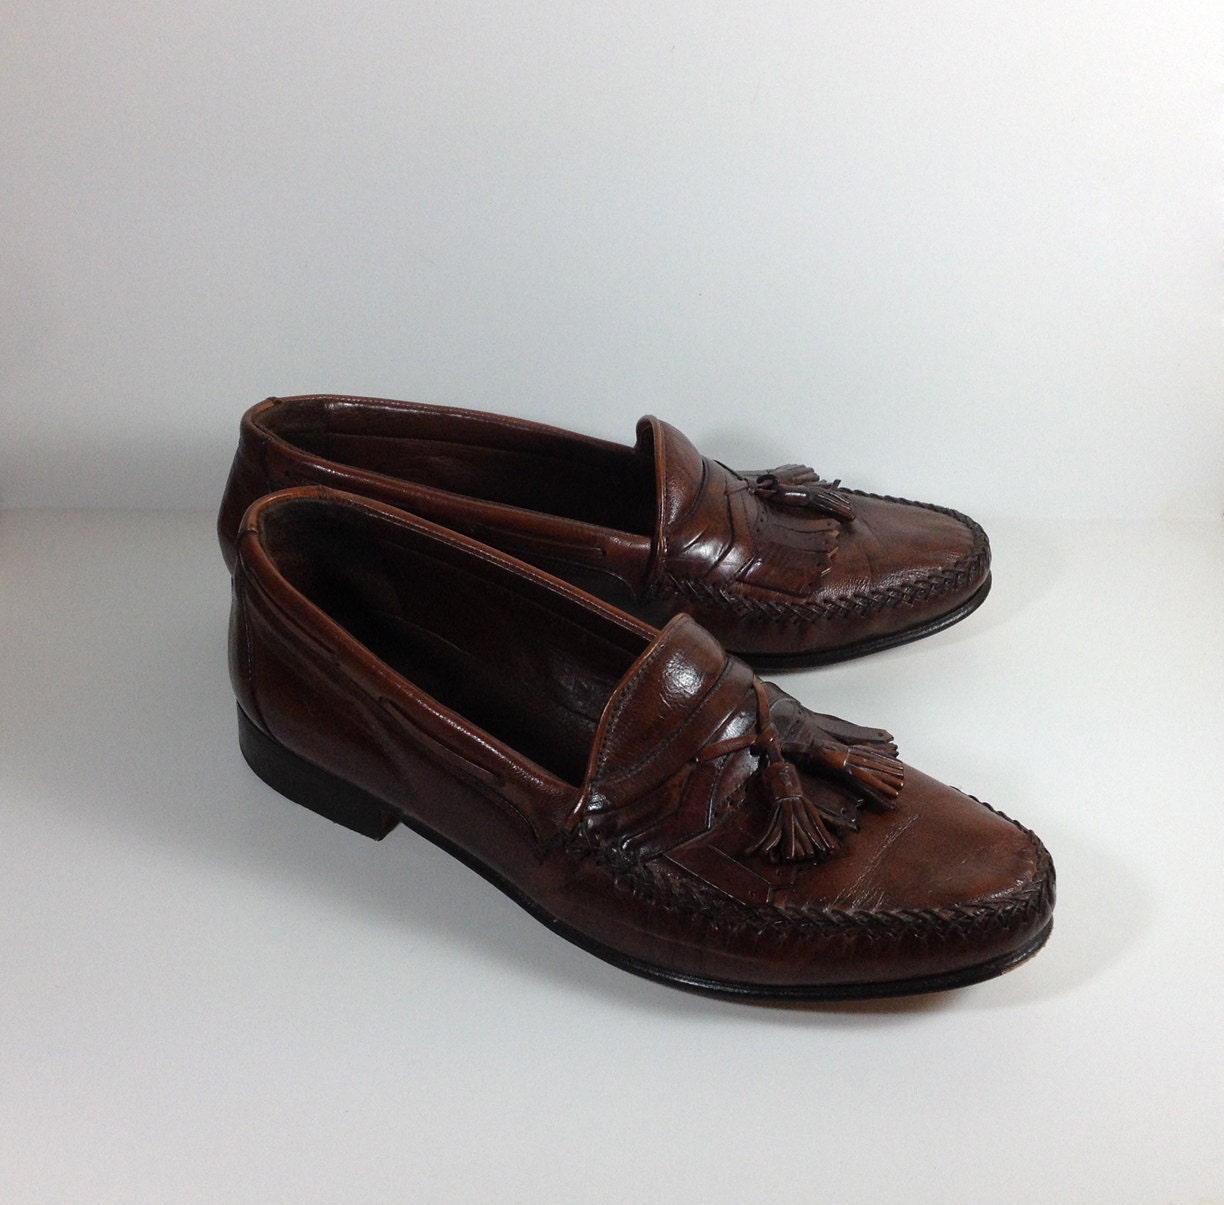 Vintage Mens Italian Leather Loafers Size by tinywhitedogvintage